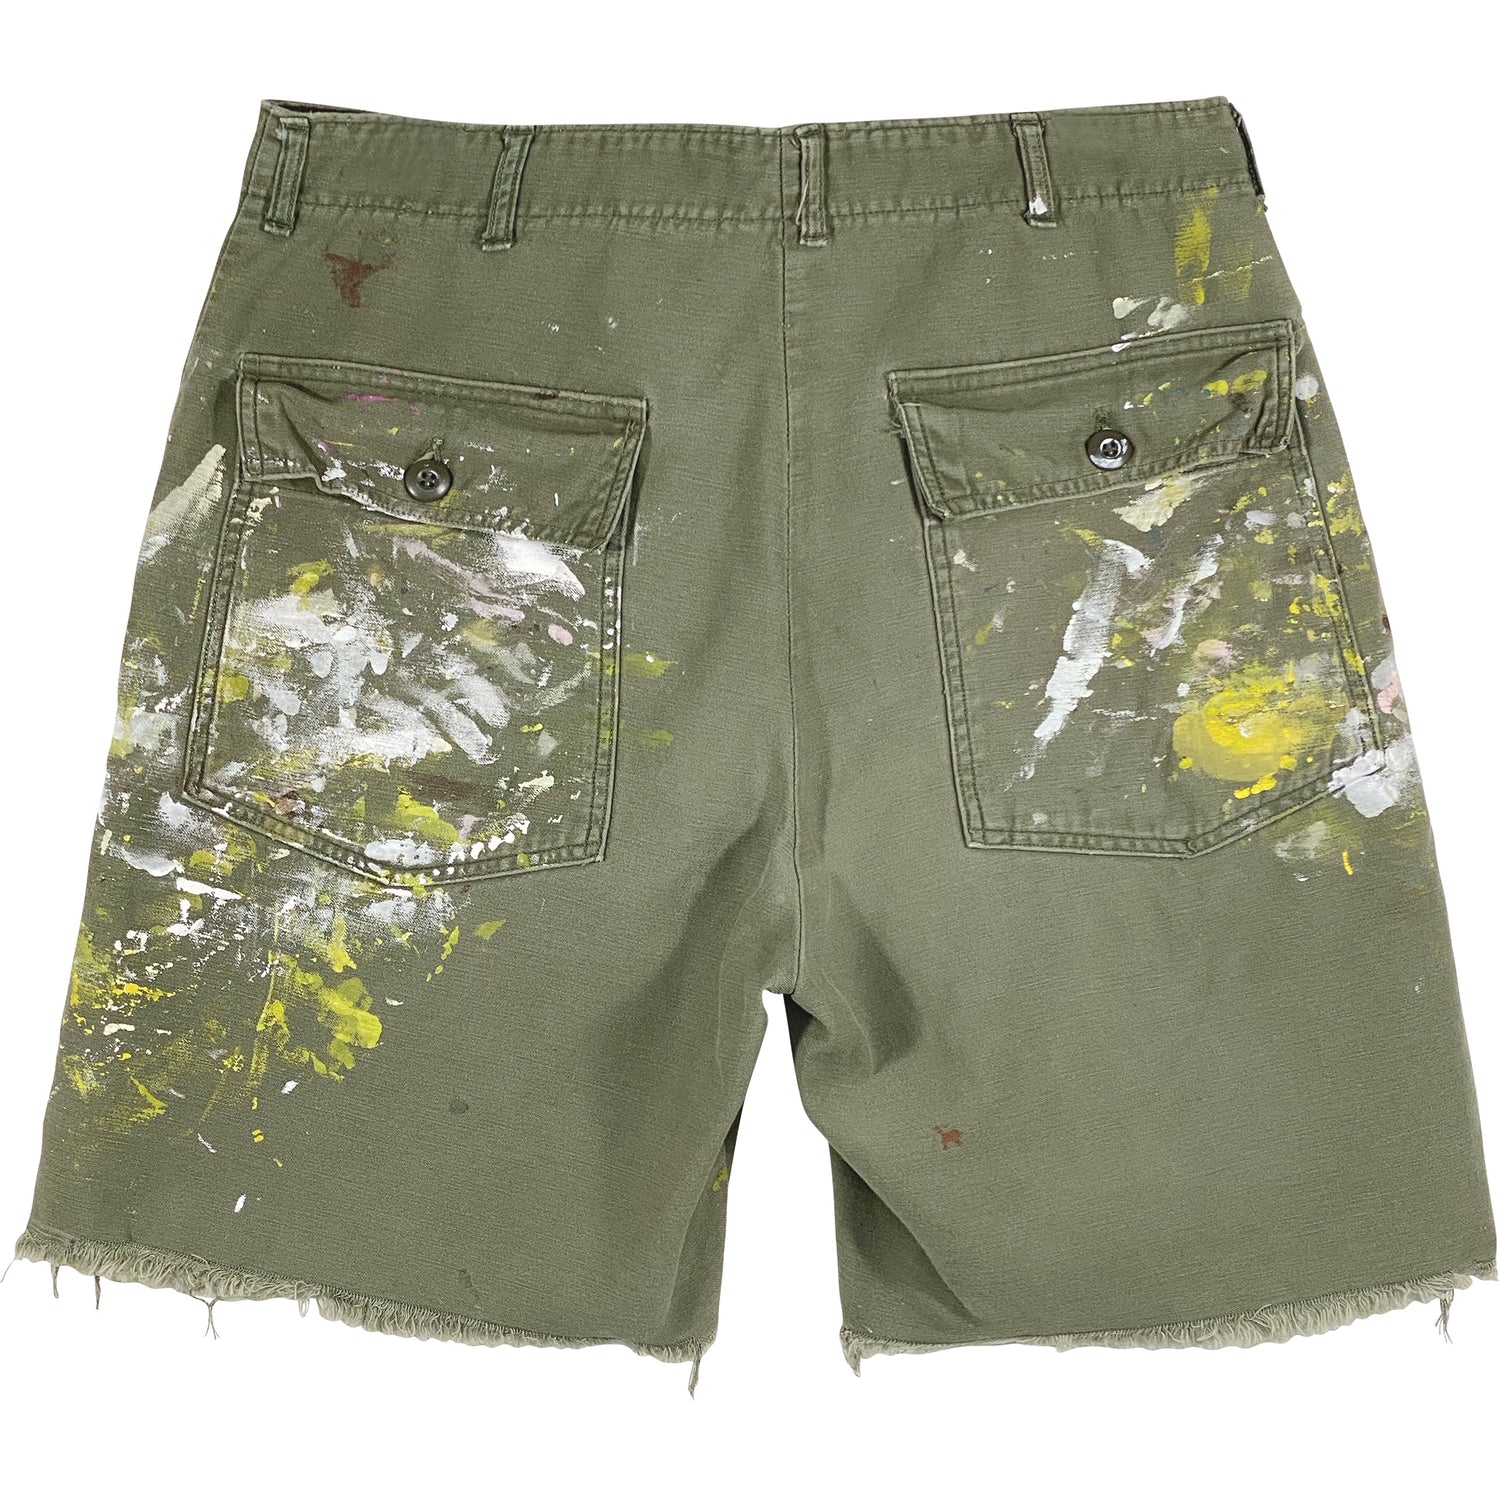 VINTAGE ARMY SHORTS WITH PAINT